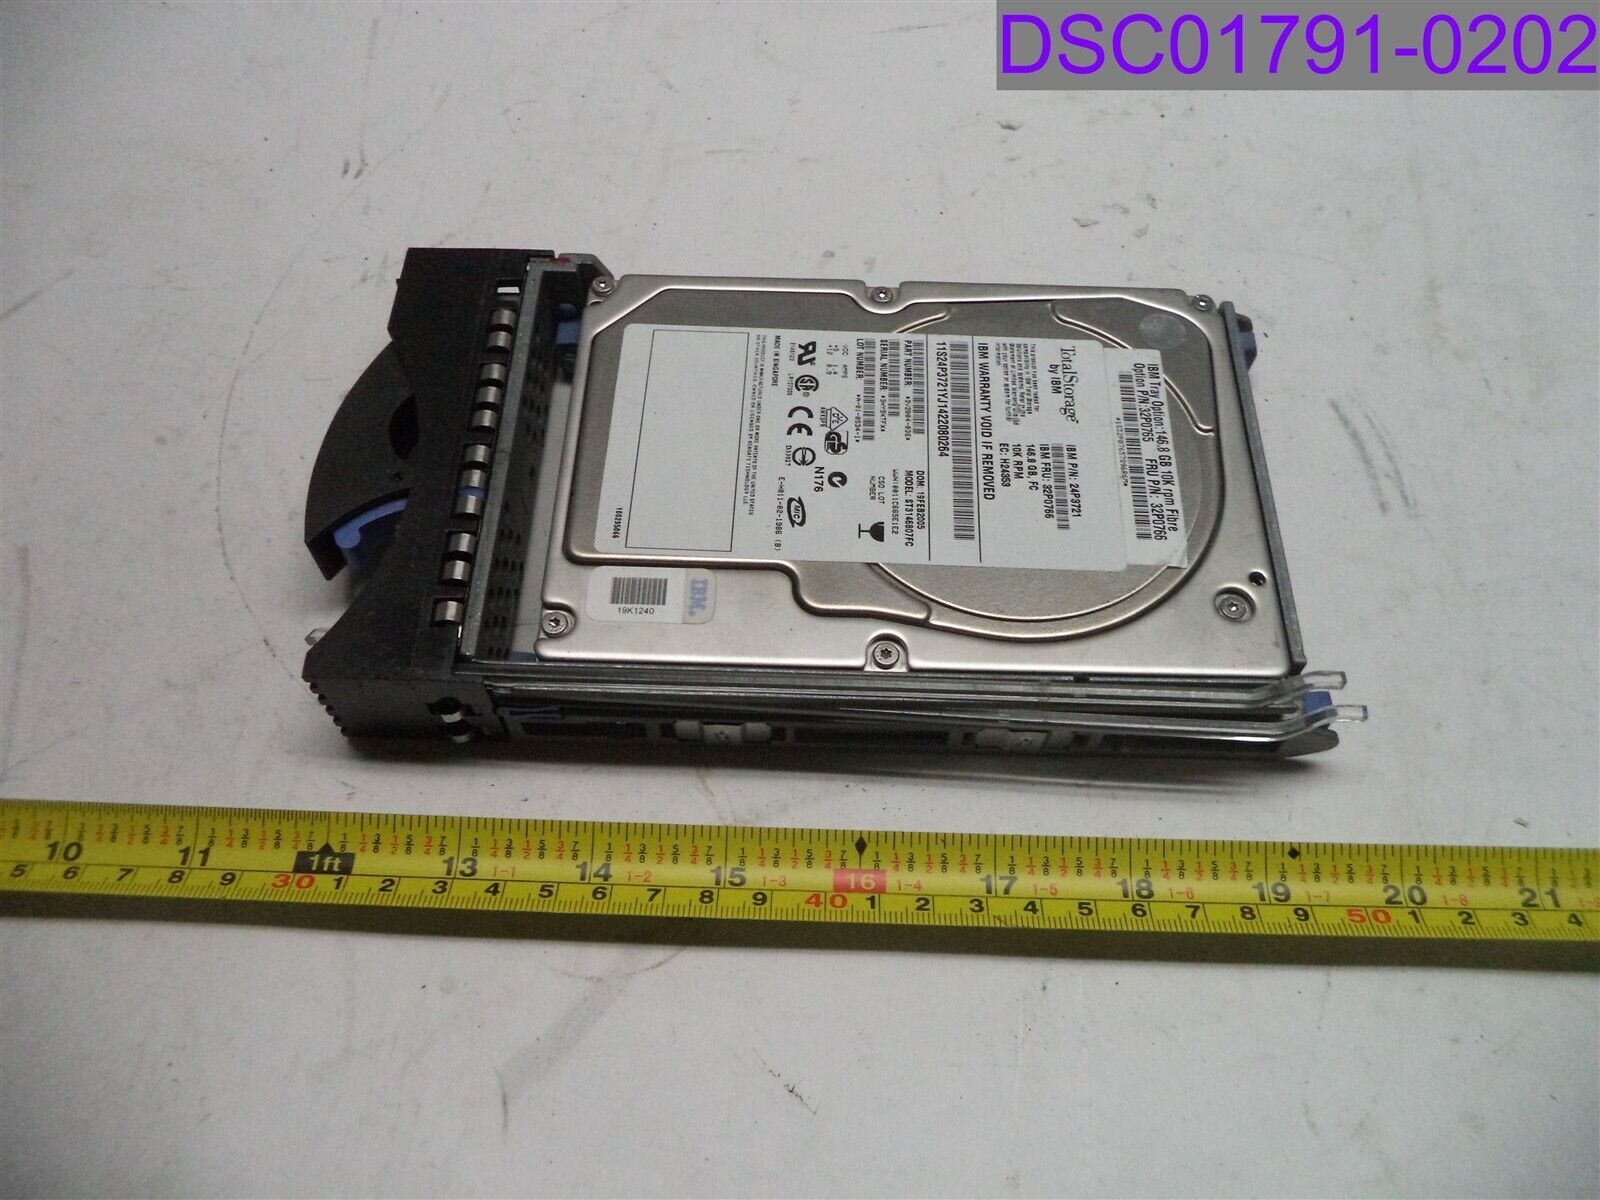 Used Qty = 5: Total Storage by IBM with Tray 146.8 GB P/N 24P3721